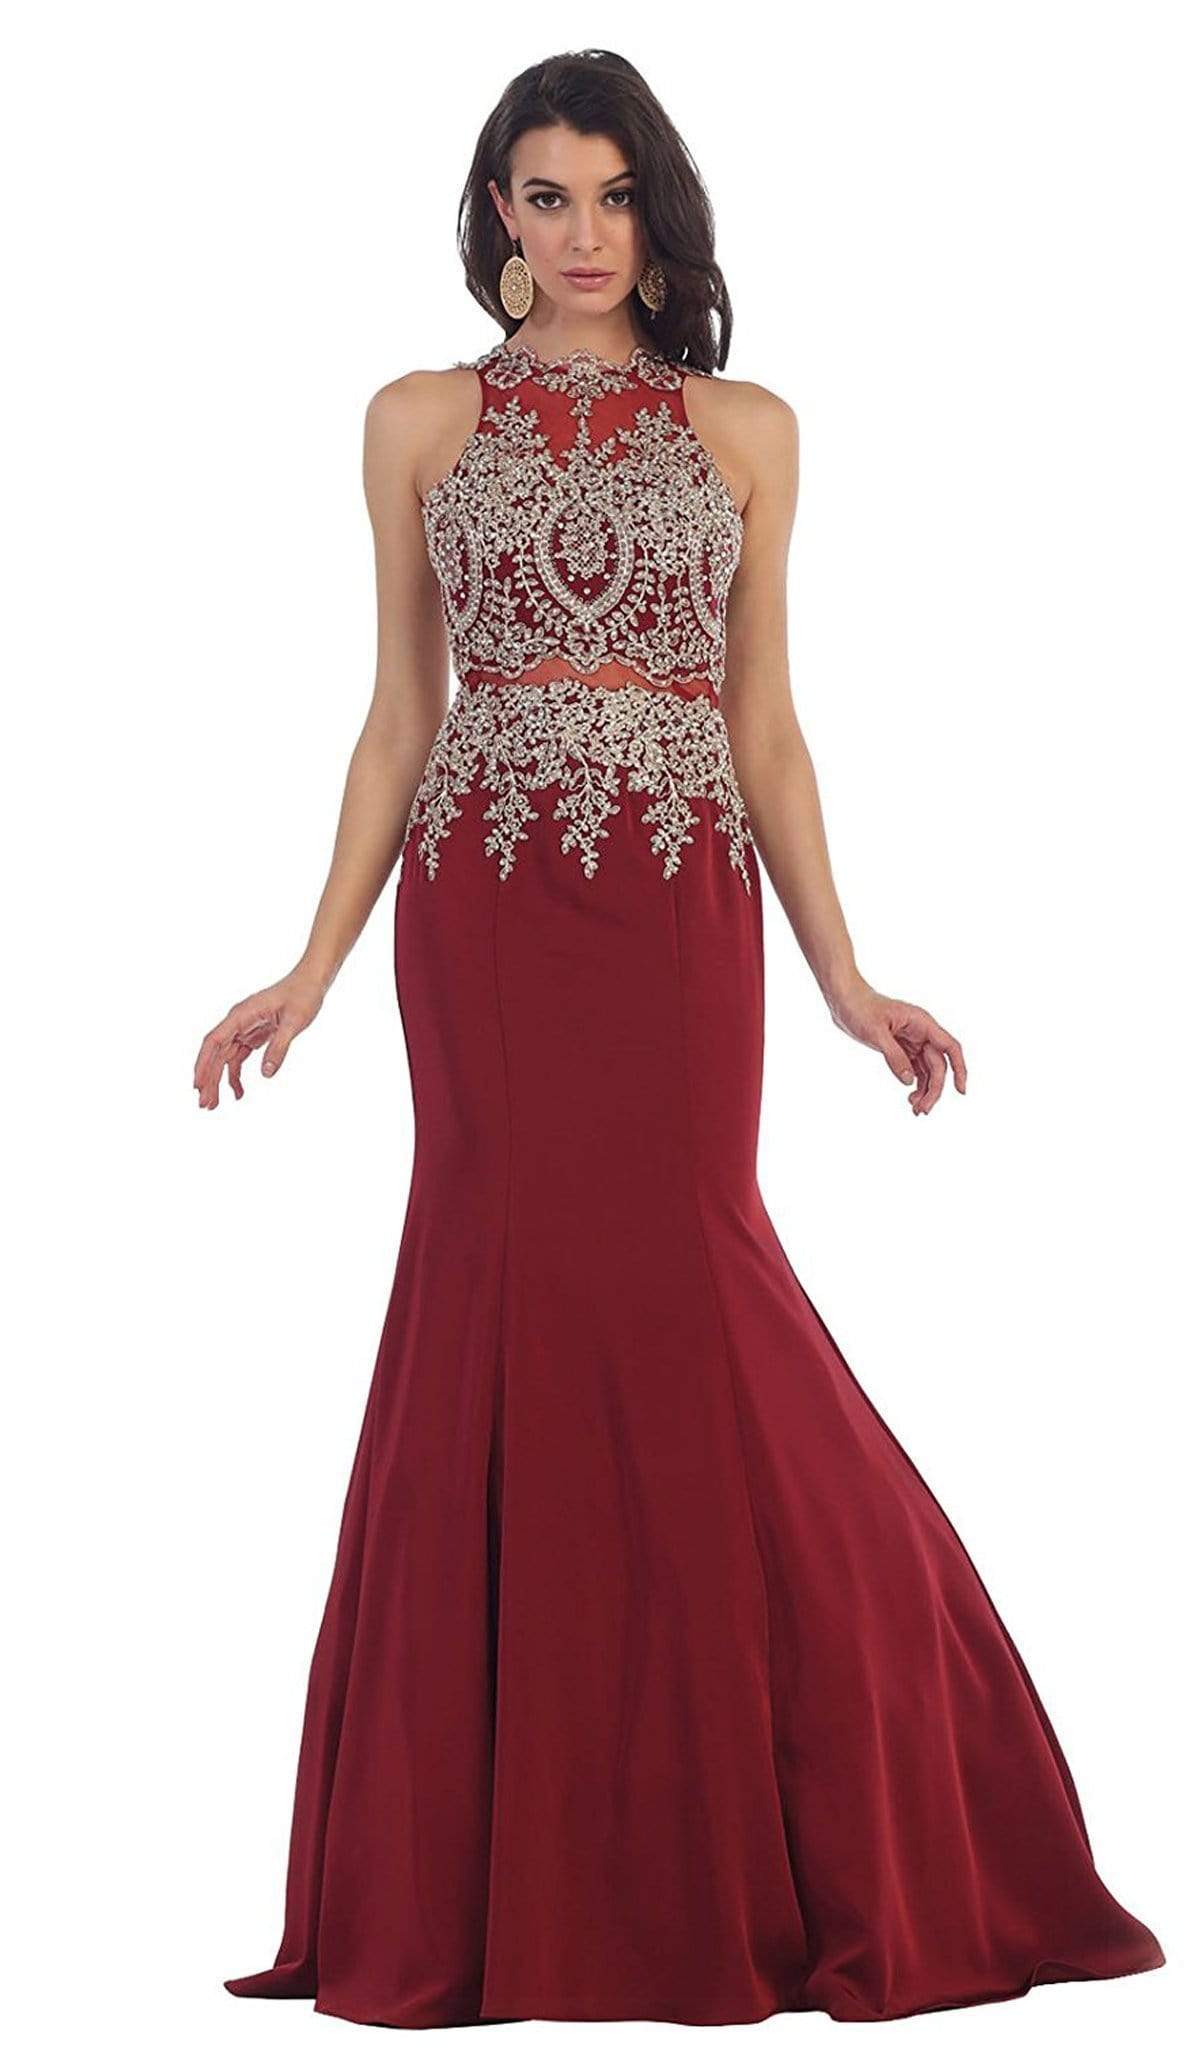 May Queen - Gilt Embroidered Illusion Trumpet Prom Gown Special Occasion Dress 2 / Burgundy